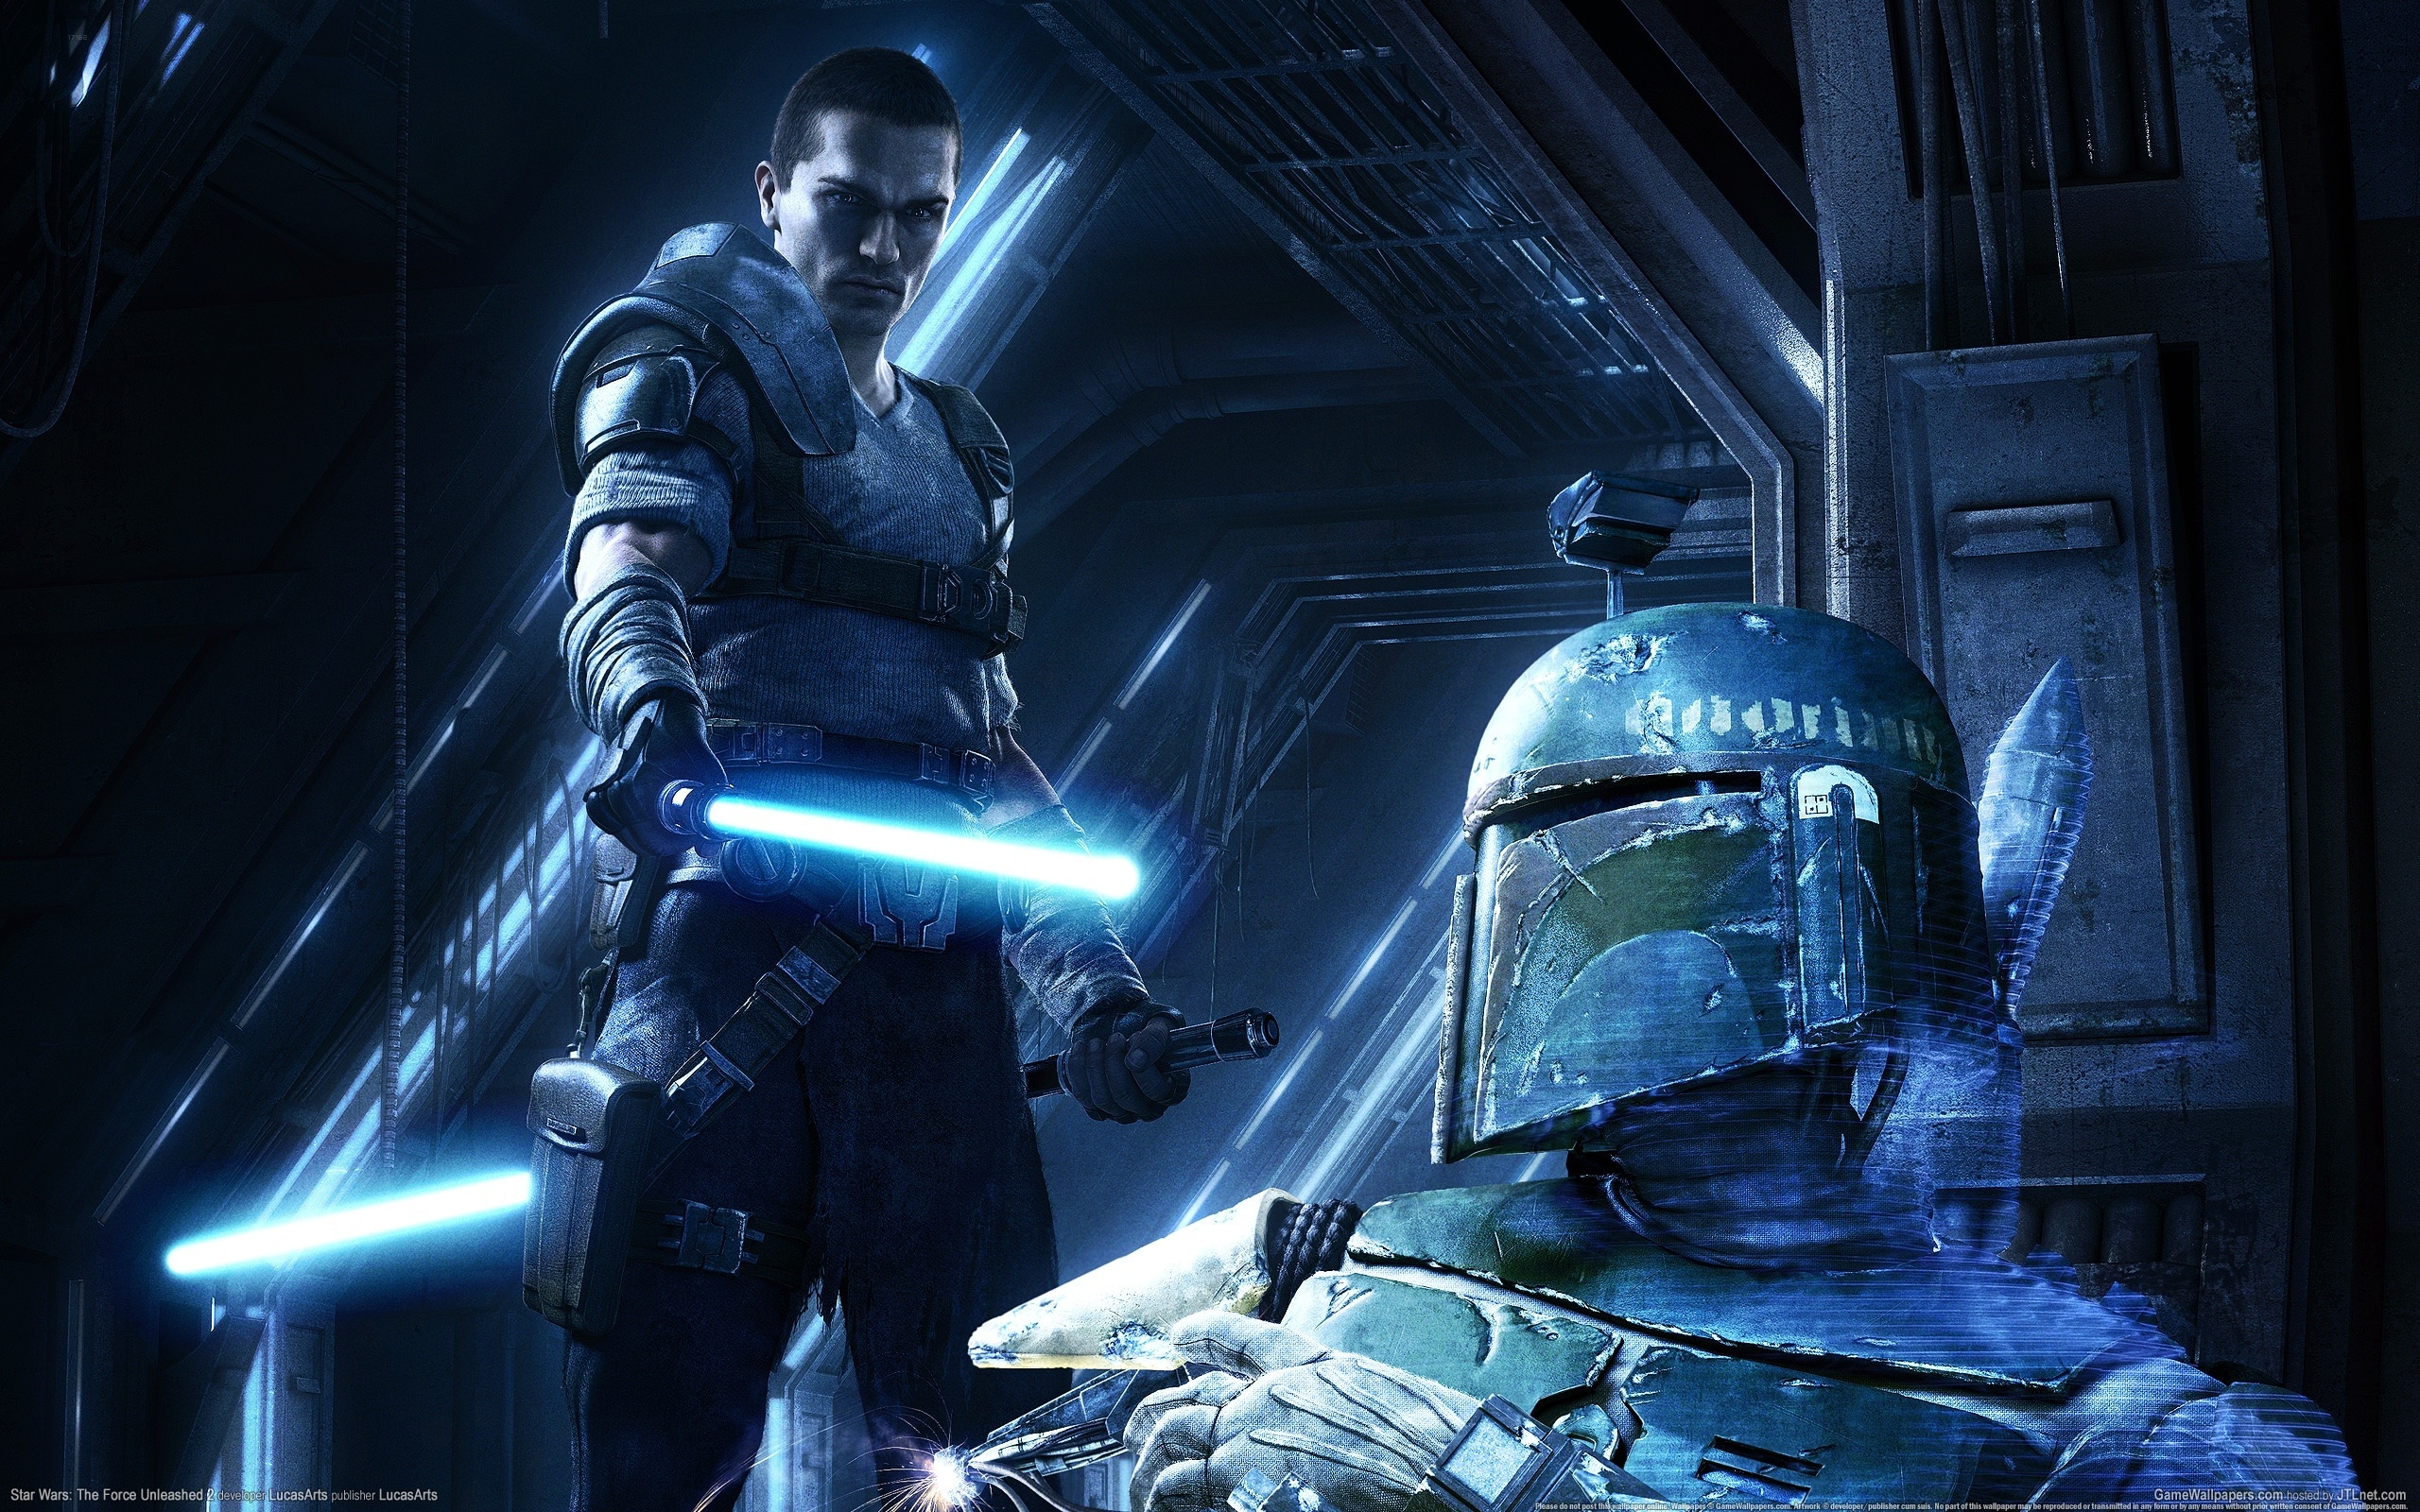 Игра star wars the force unleashed. Star Wars unleashed 2 Старкиллер. Гален Марек Старкиллер Инквизитор. Star Wars the Force unleashed Старкиллер. Звёздные войны the Force unleashed 2.